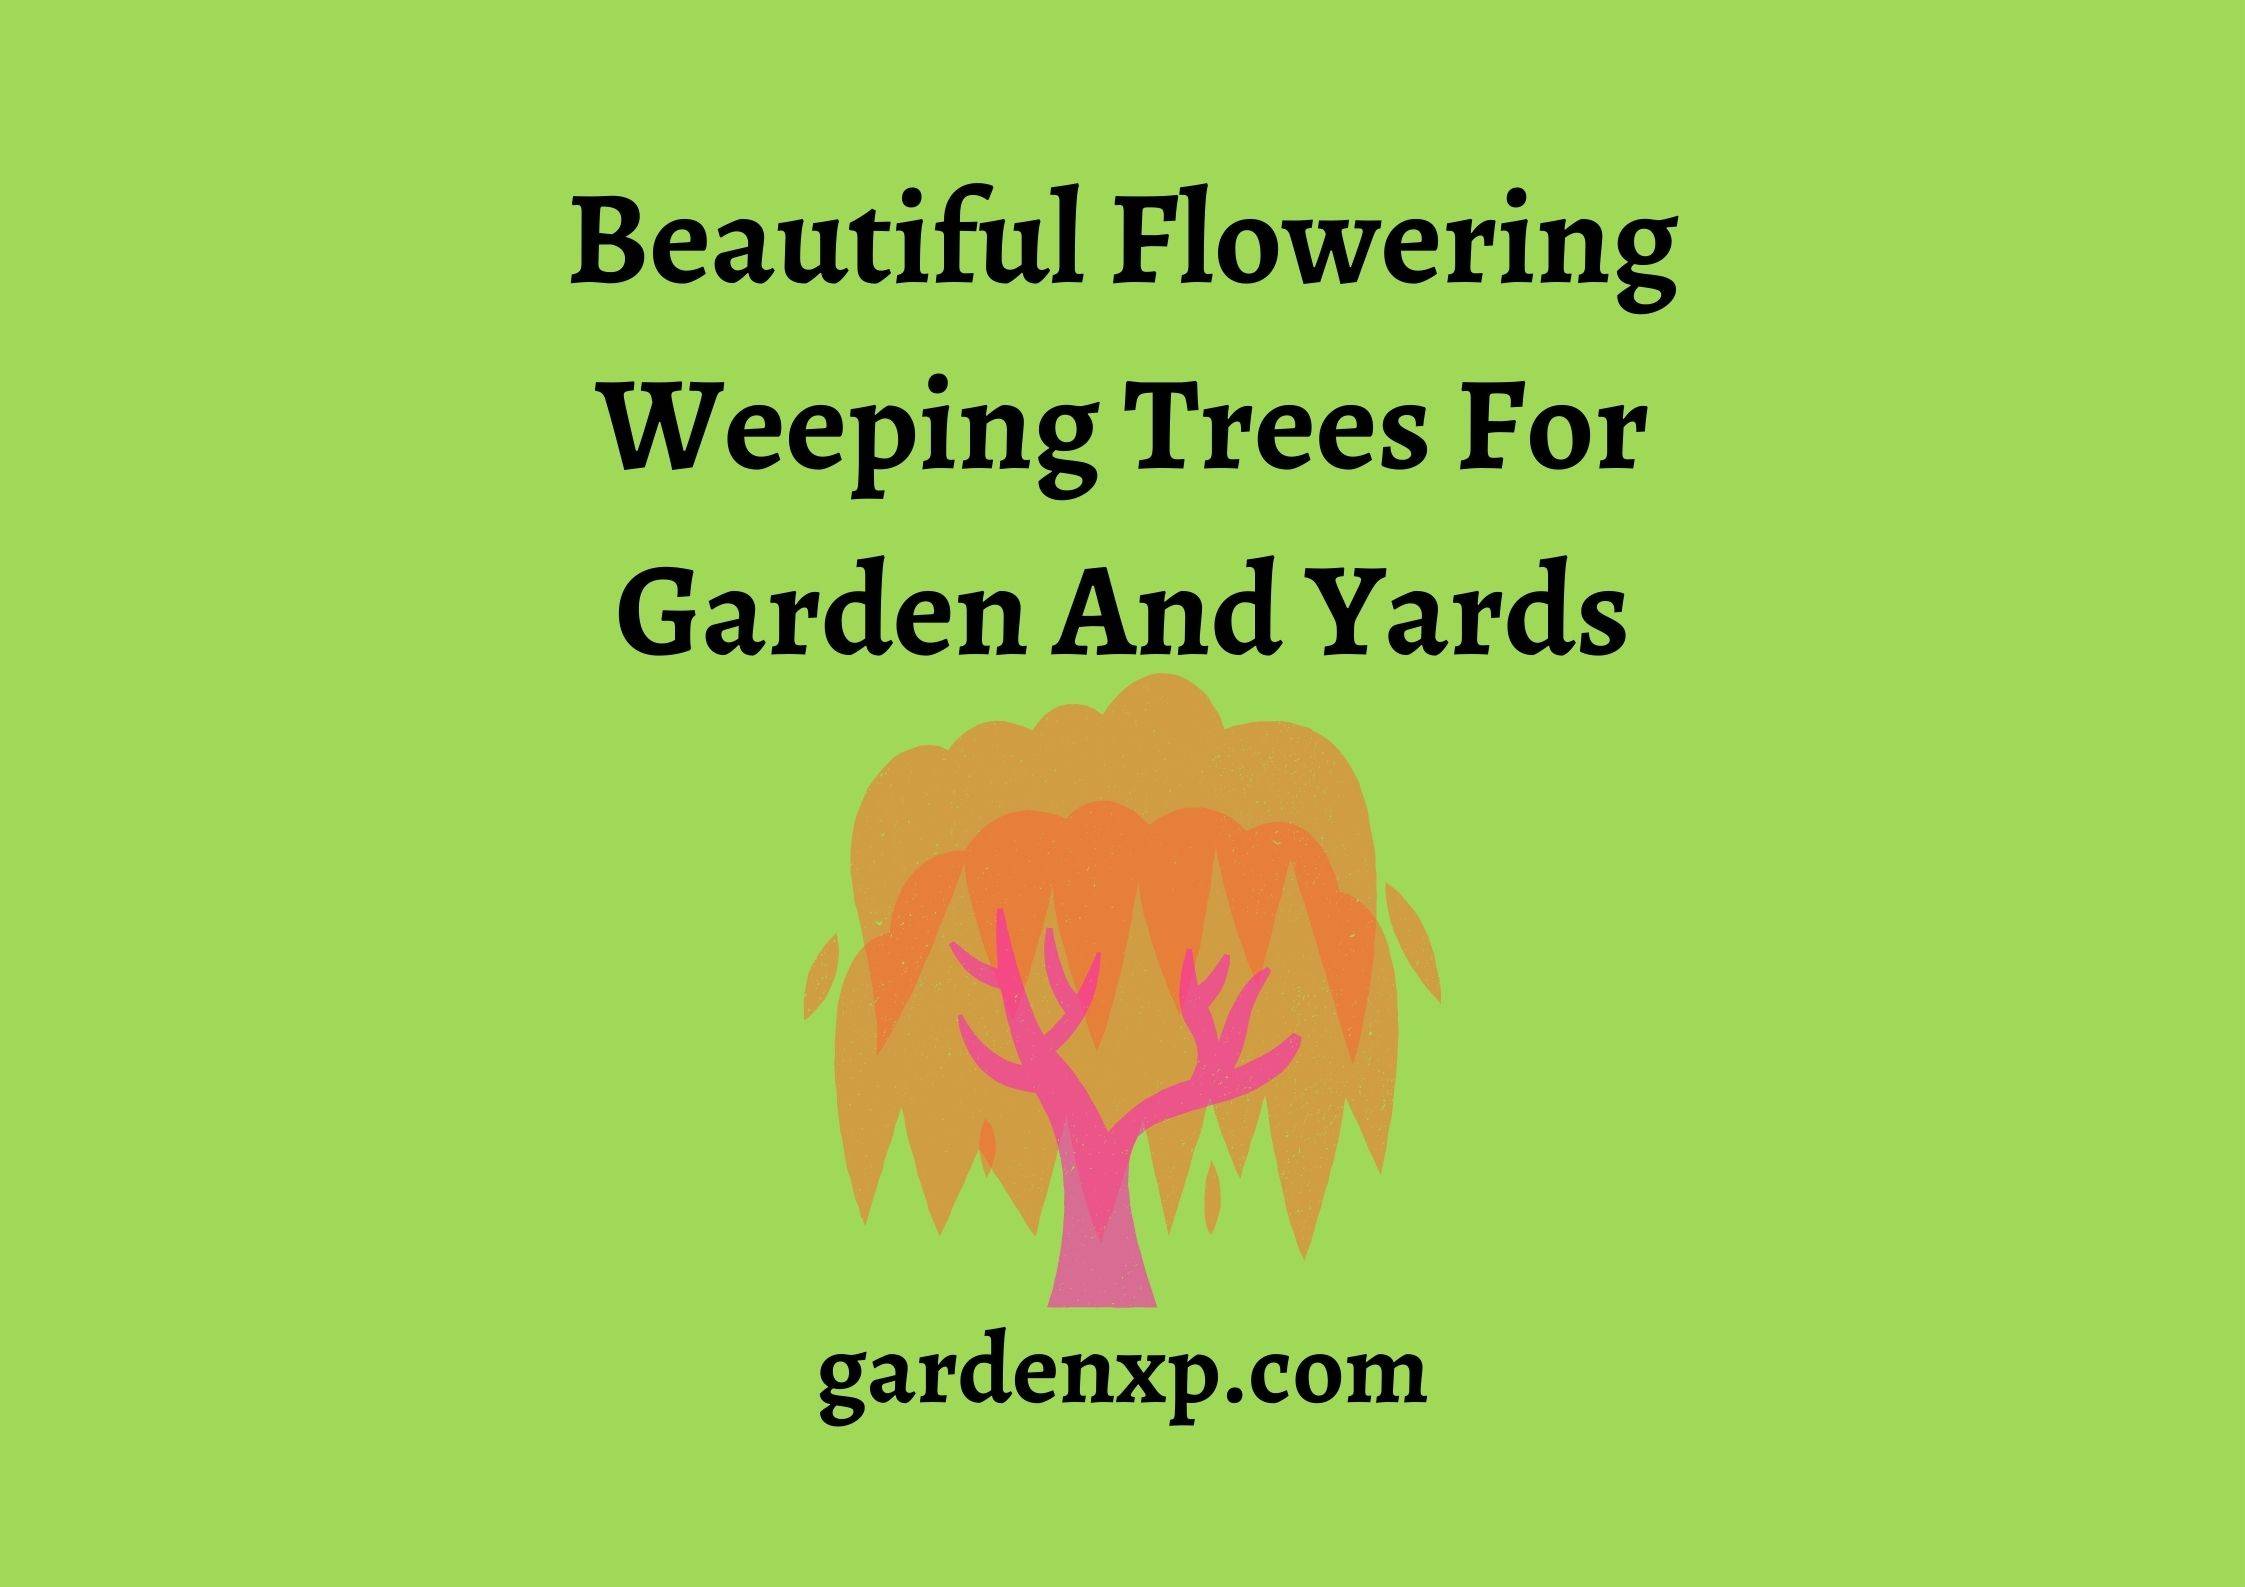 Best Blooming Weeping Trees with Flowers - Colorful Flower Weeping Trees List